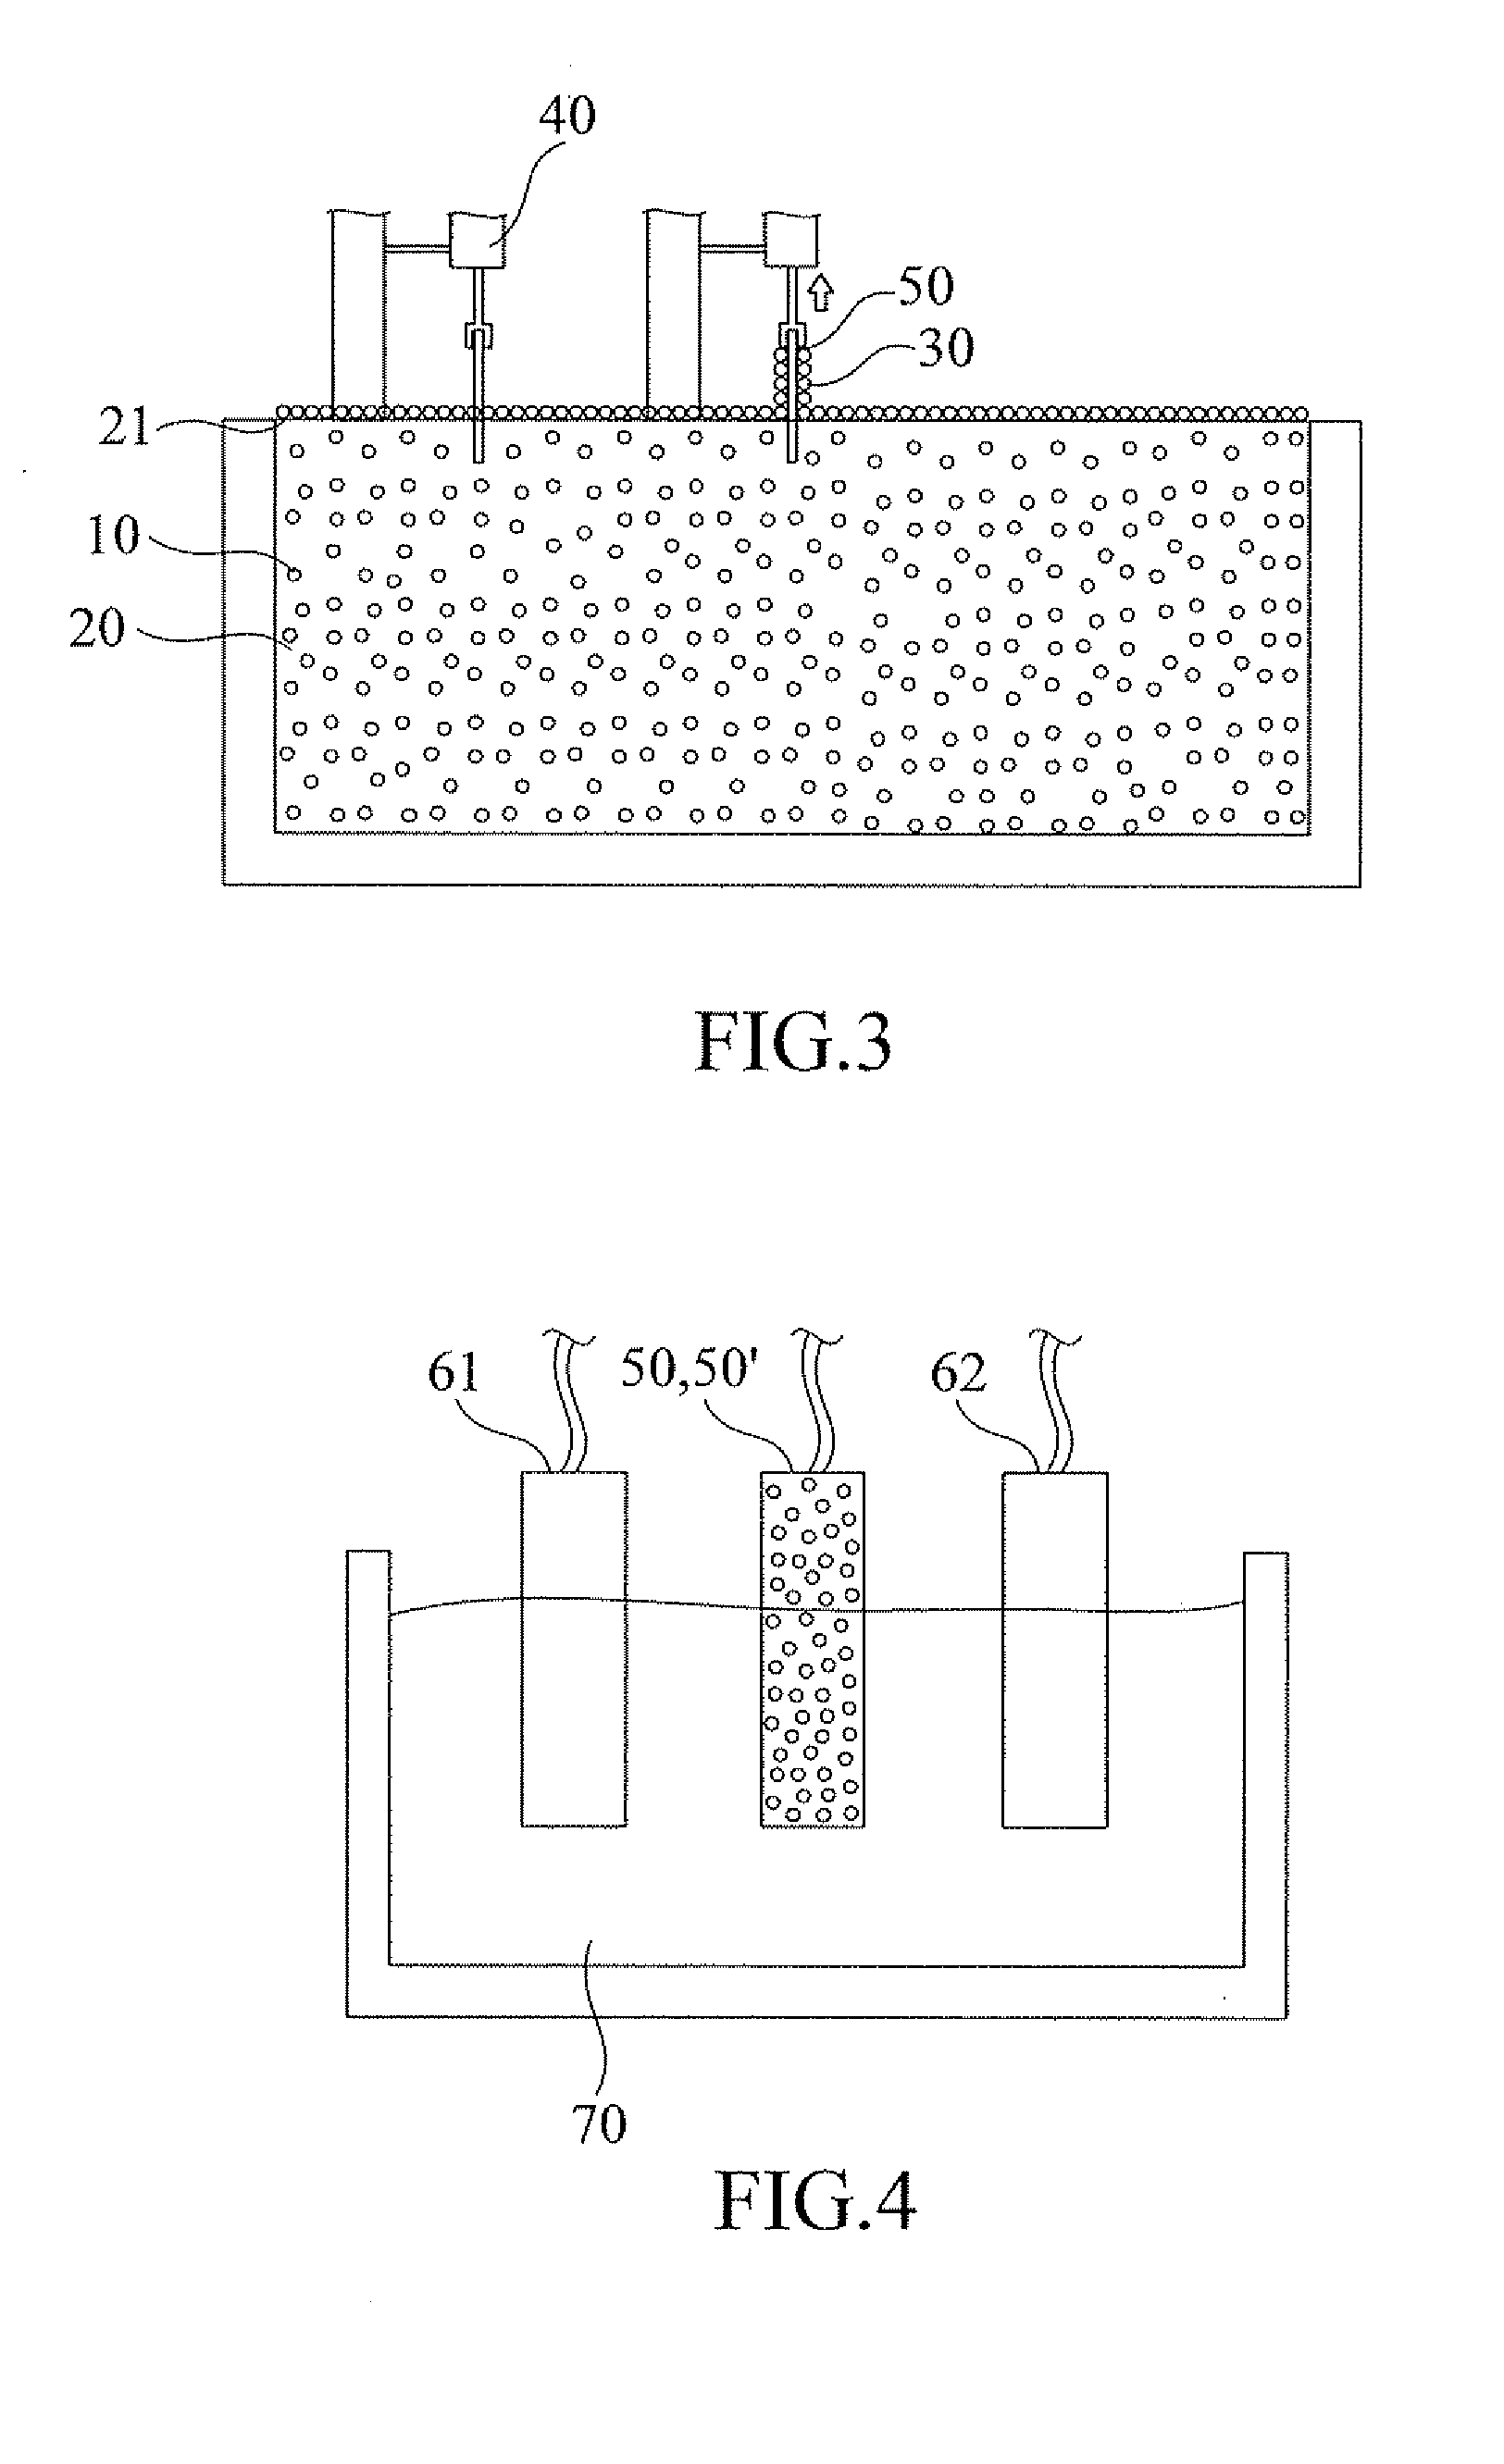 Method for changing conformation of globular proteins